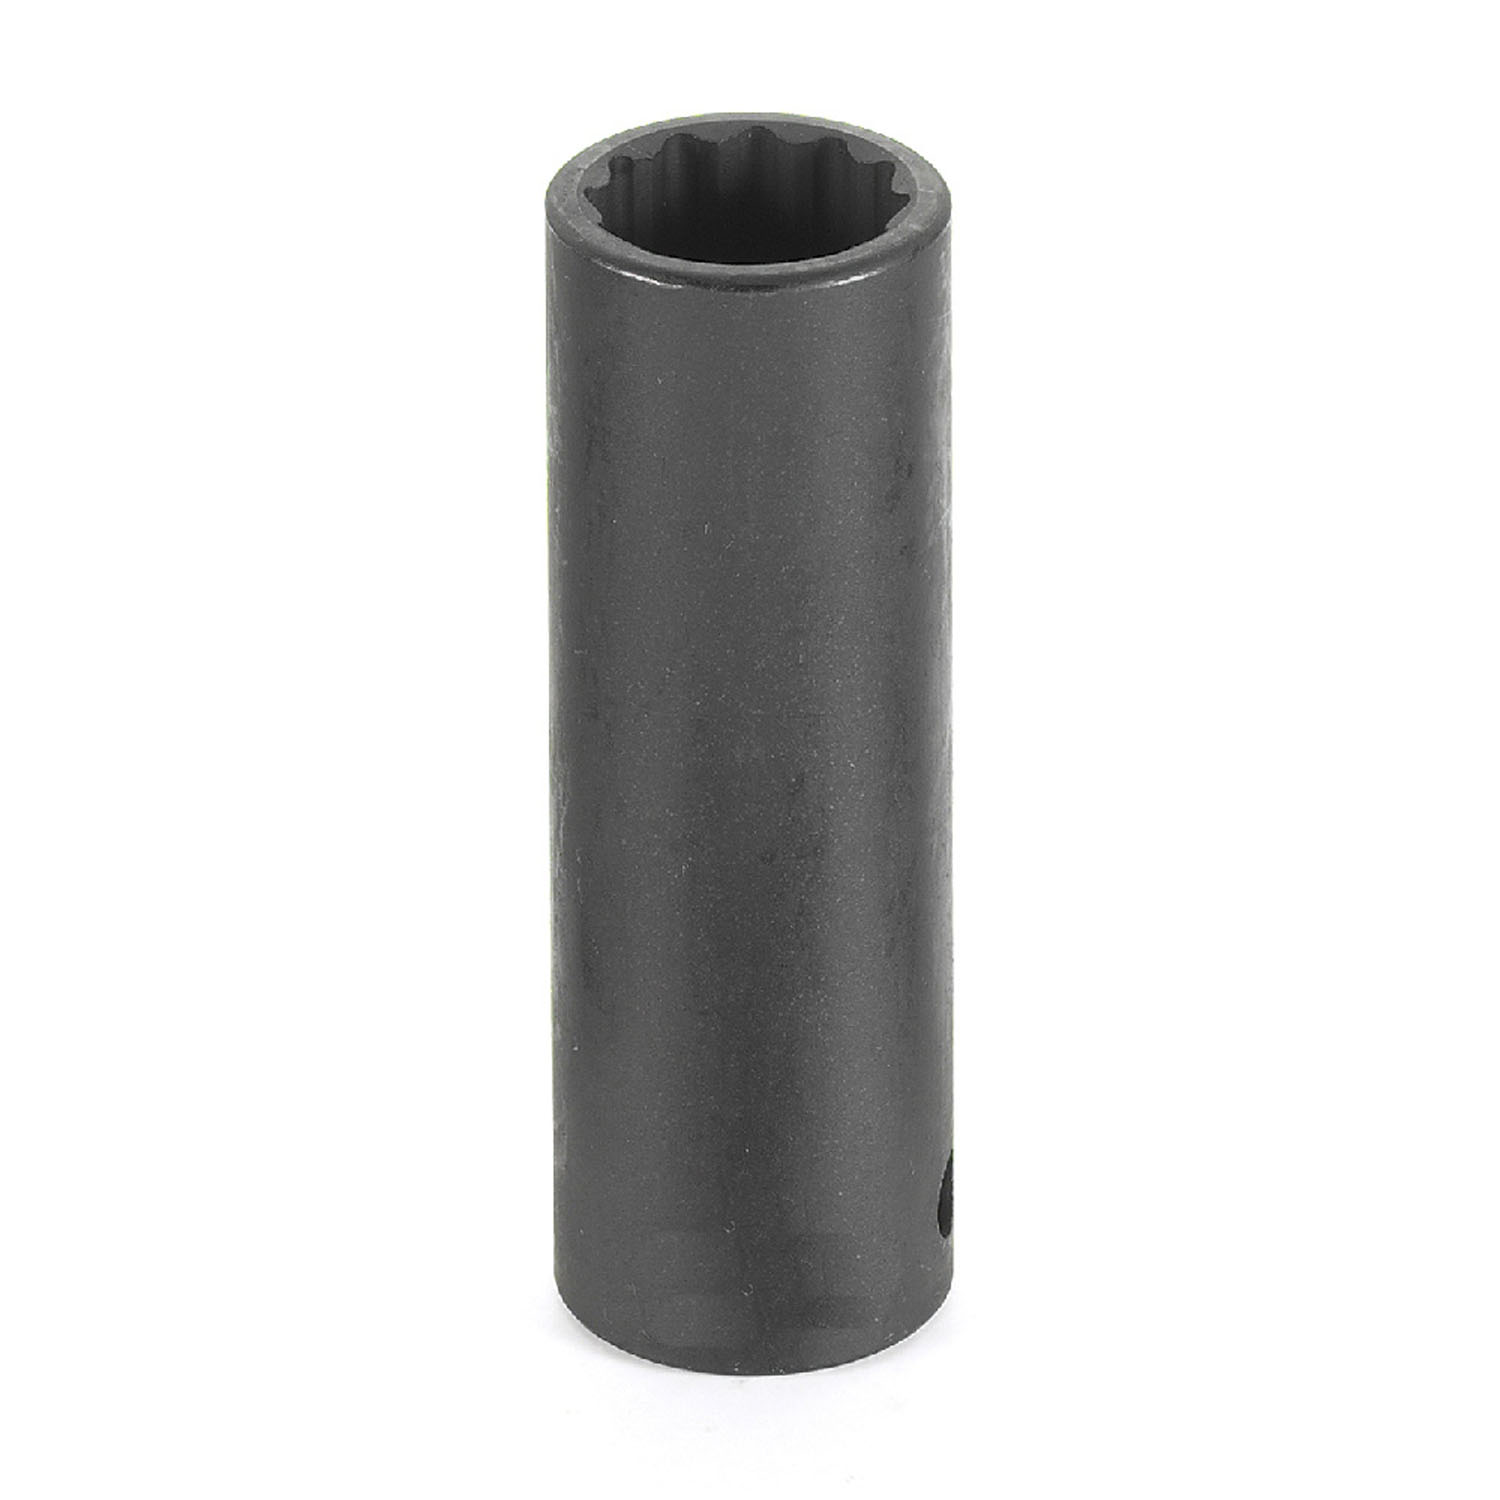 1/2 IN. DRIVE STANDARD LENGTH IMPACT 12 POINT METRIC SOCKETS (MULTIPLE SIZES AVAILABLE)